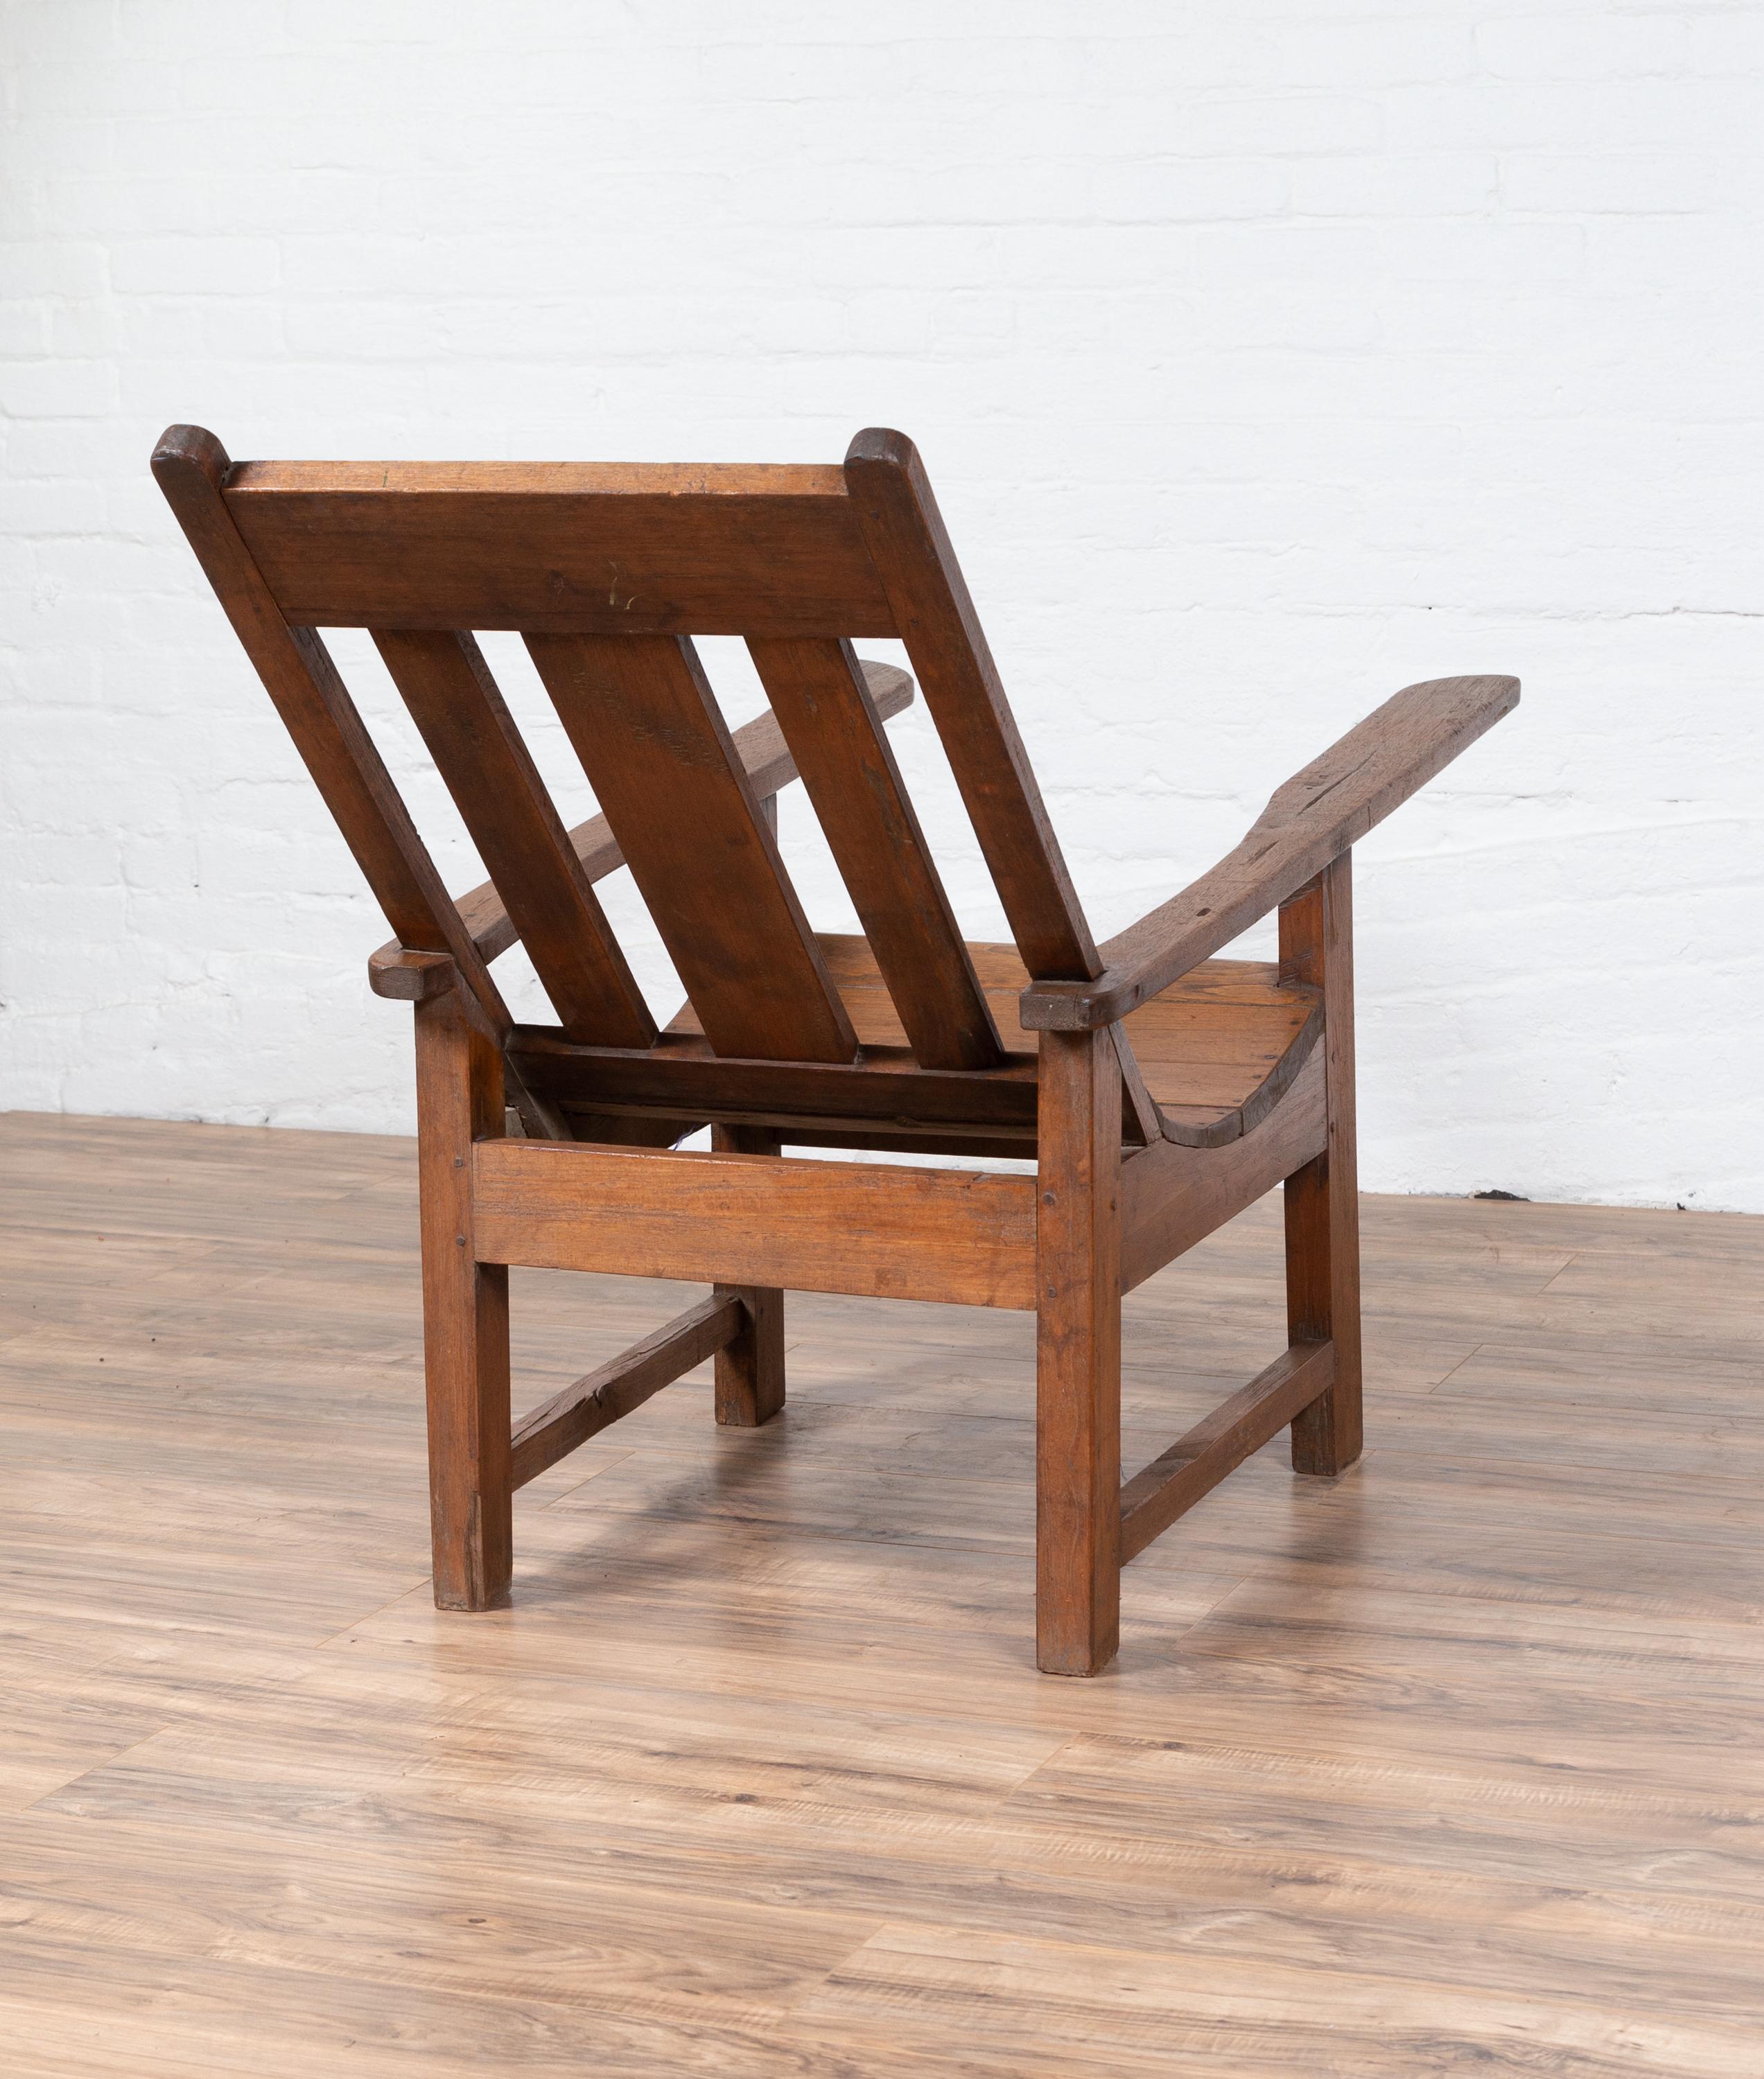 20th Century Antique Indonesian Teak Plantation Lounge Chair from Madura with Slanted Back For Sale